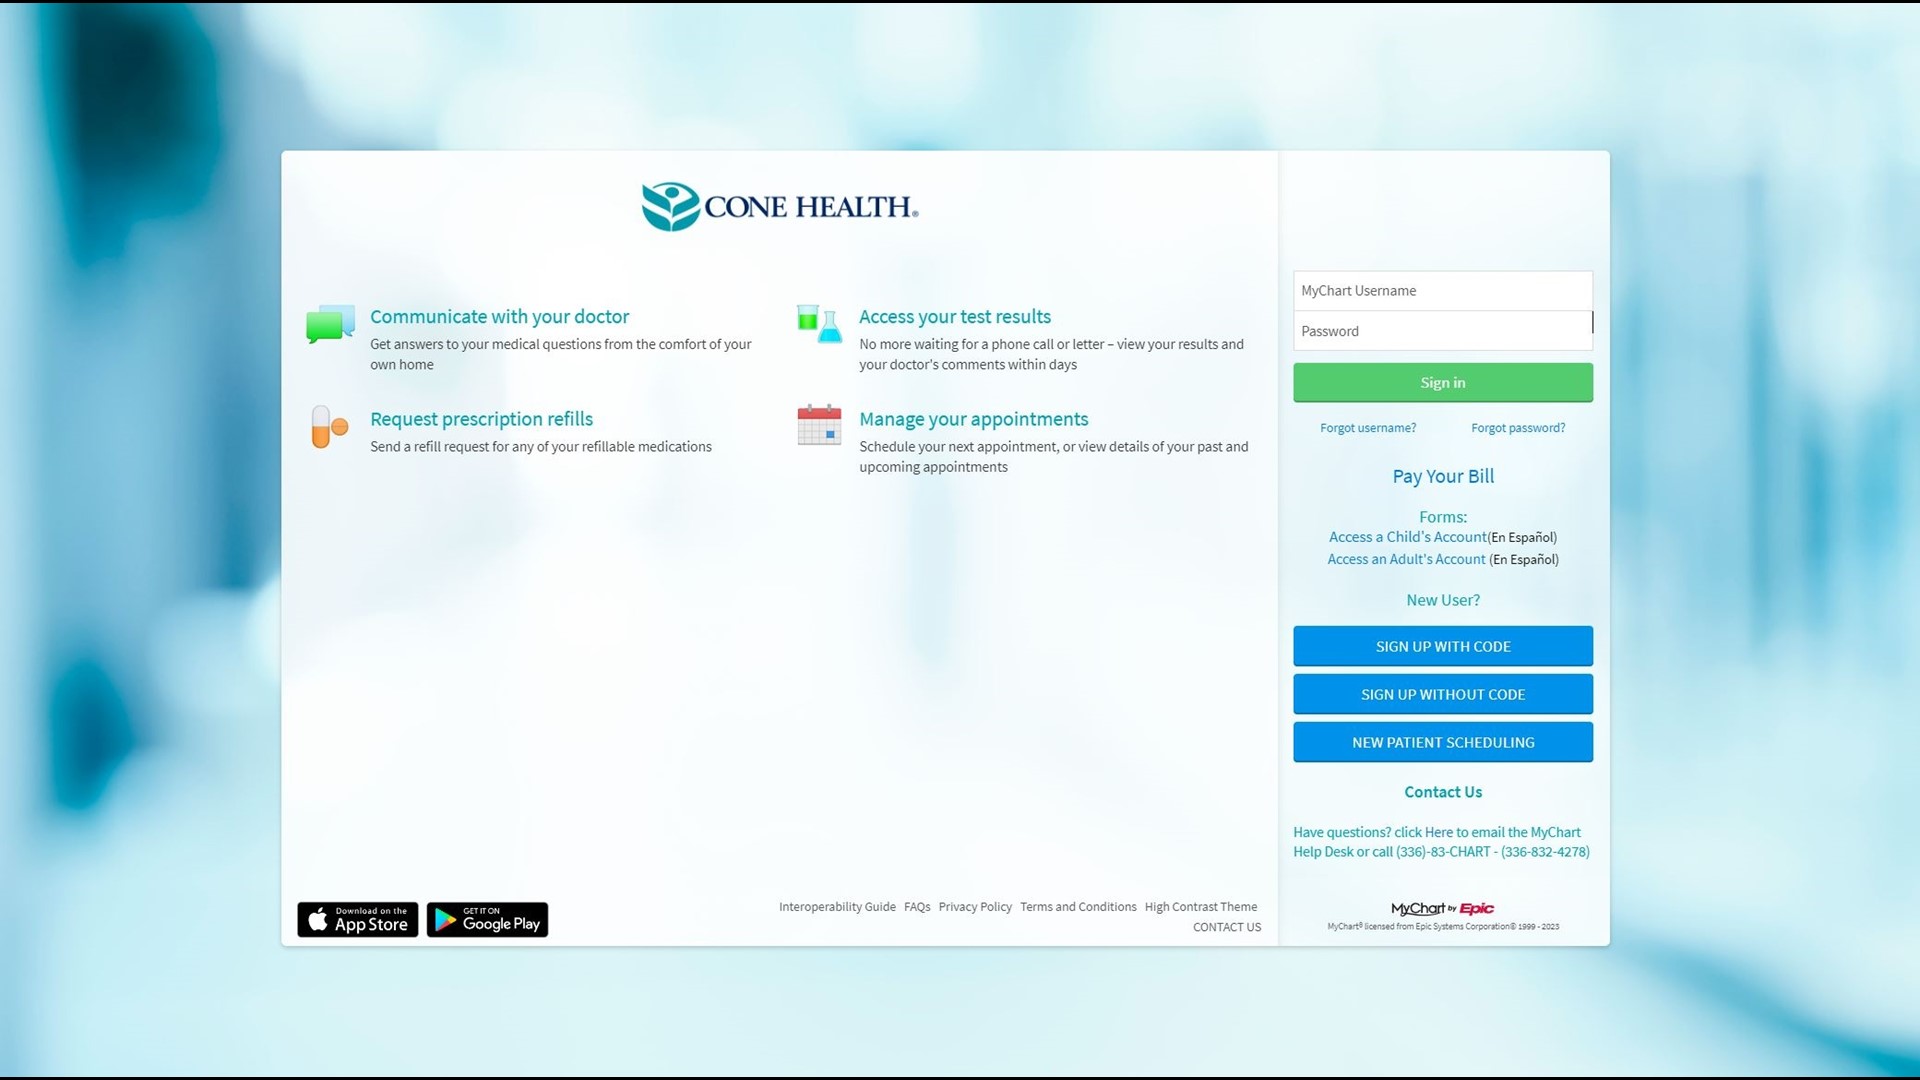 You can use the website or app to manage your health digitally. Test results and messaging with a doctor are just some of the features.